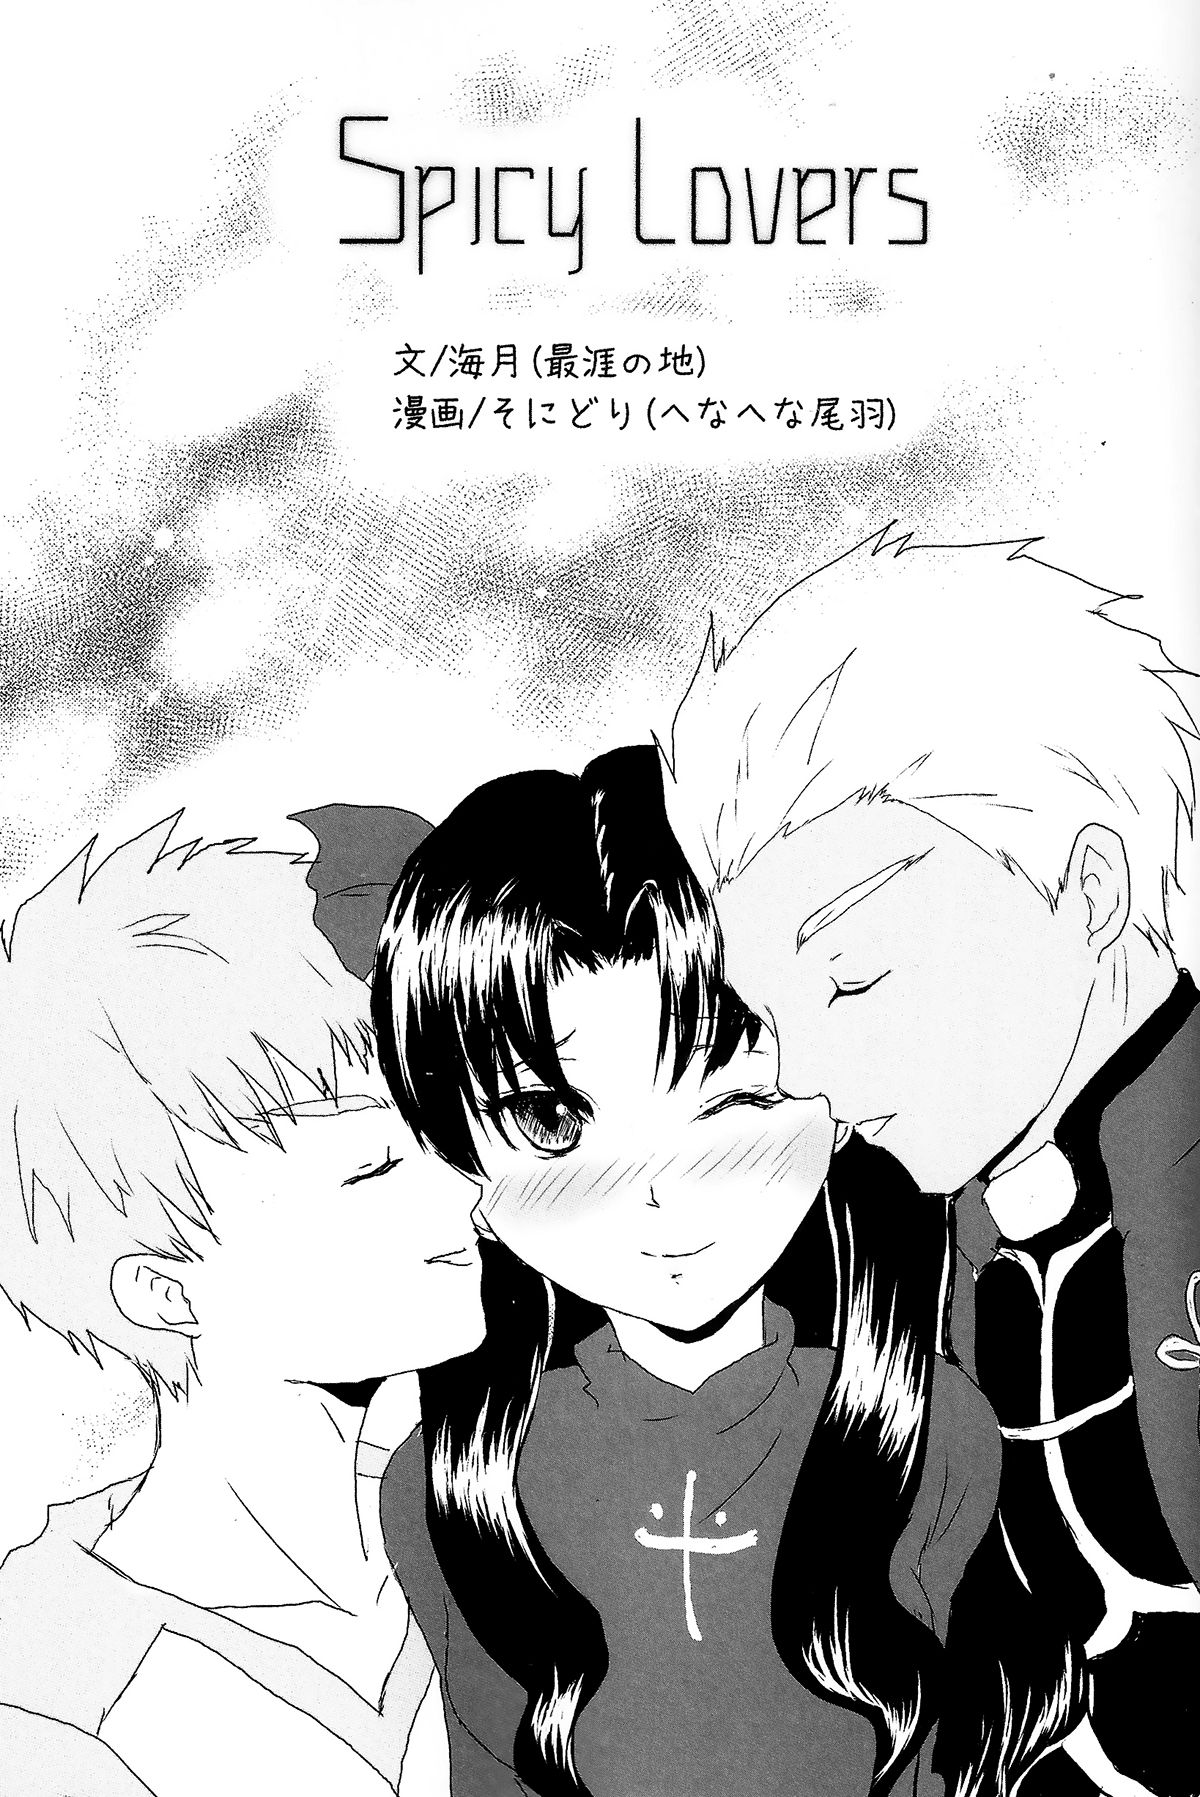 SpicyLovers (Fate) [最涯の地、へなへな尾羽 (海月、そにどり)] Spicy Lovers (Fate/stay night) [2013年7月1日]